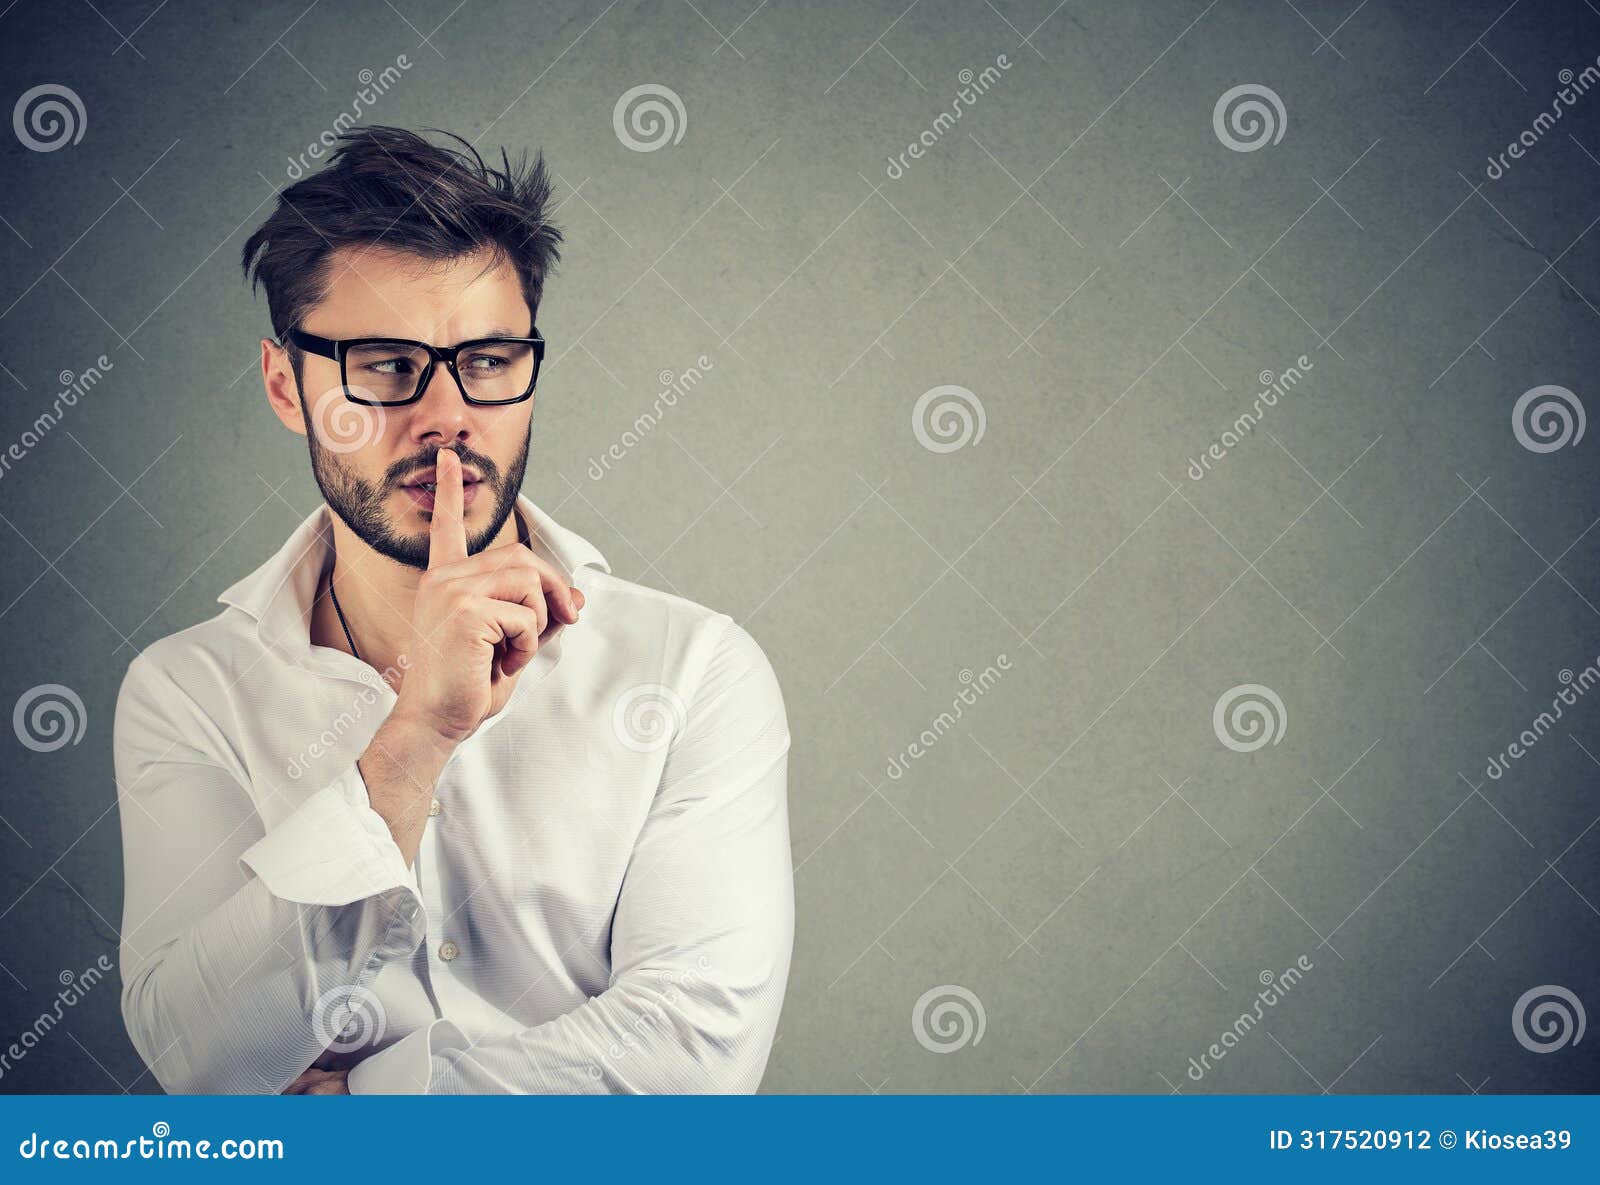 man giving a shh quiet finger to lips gesture